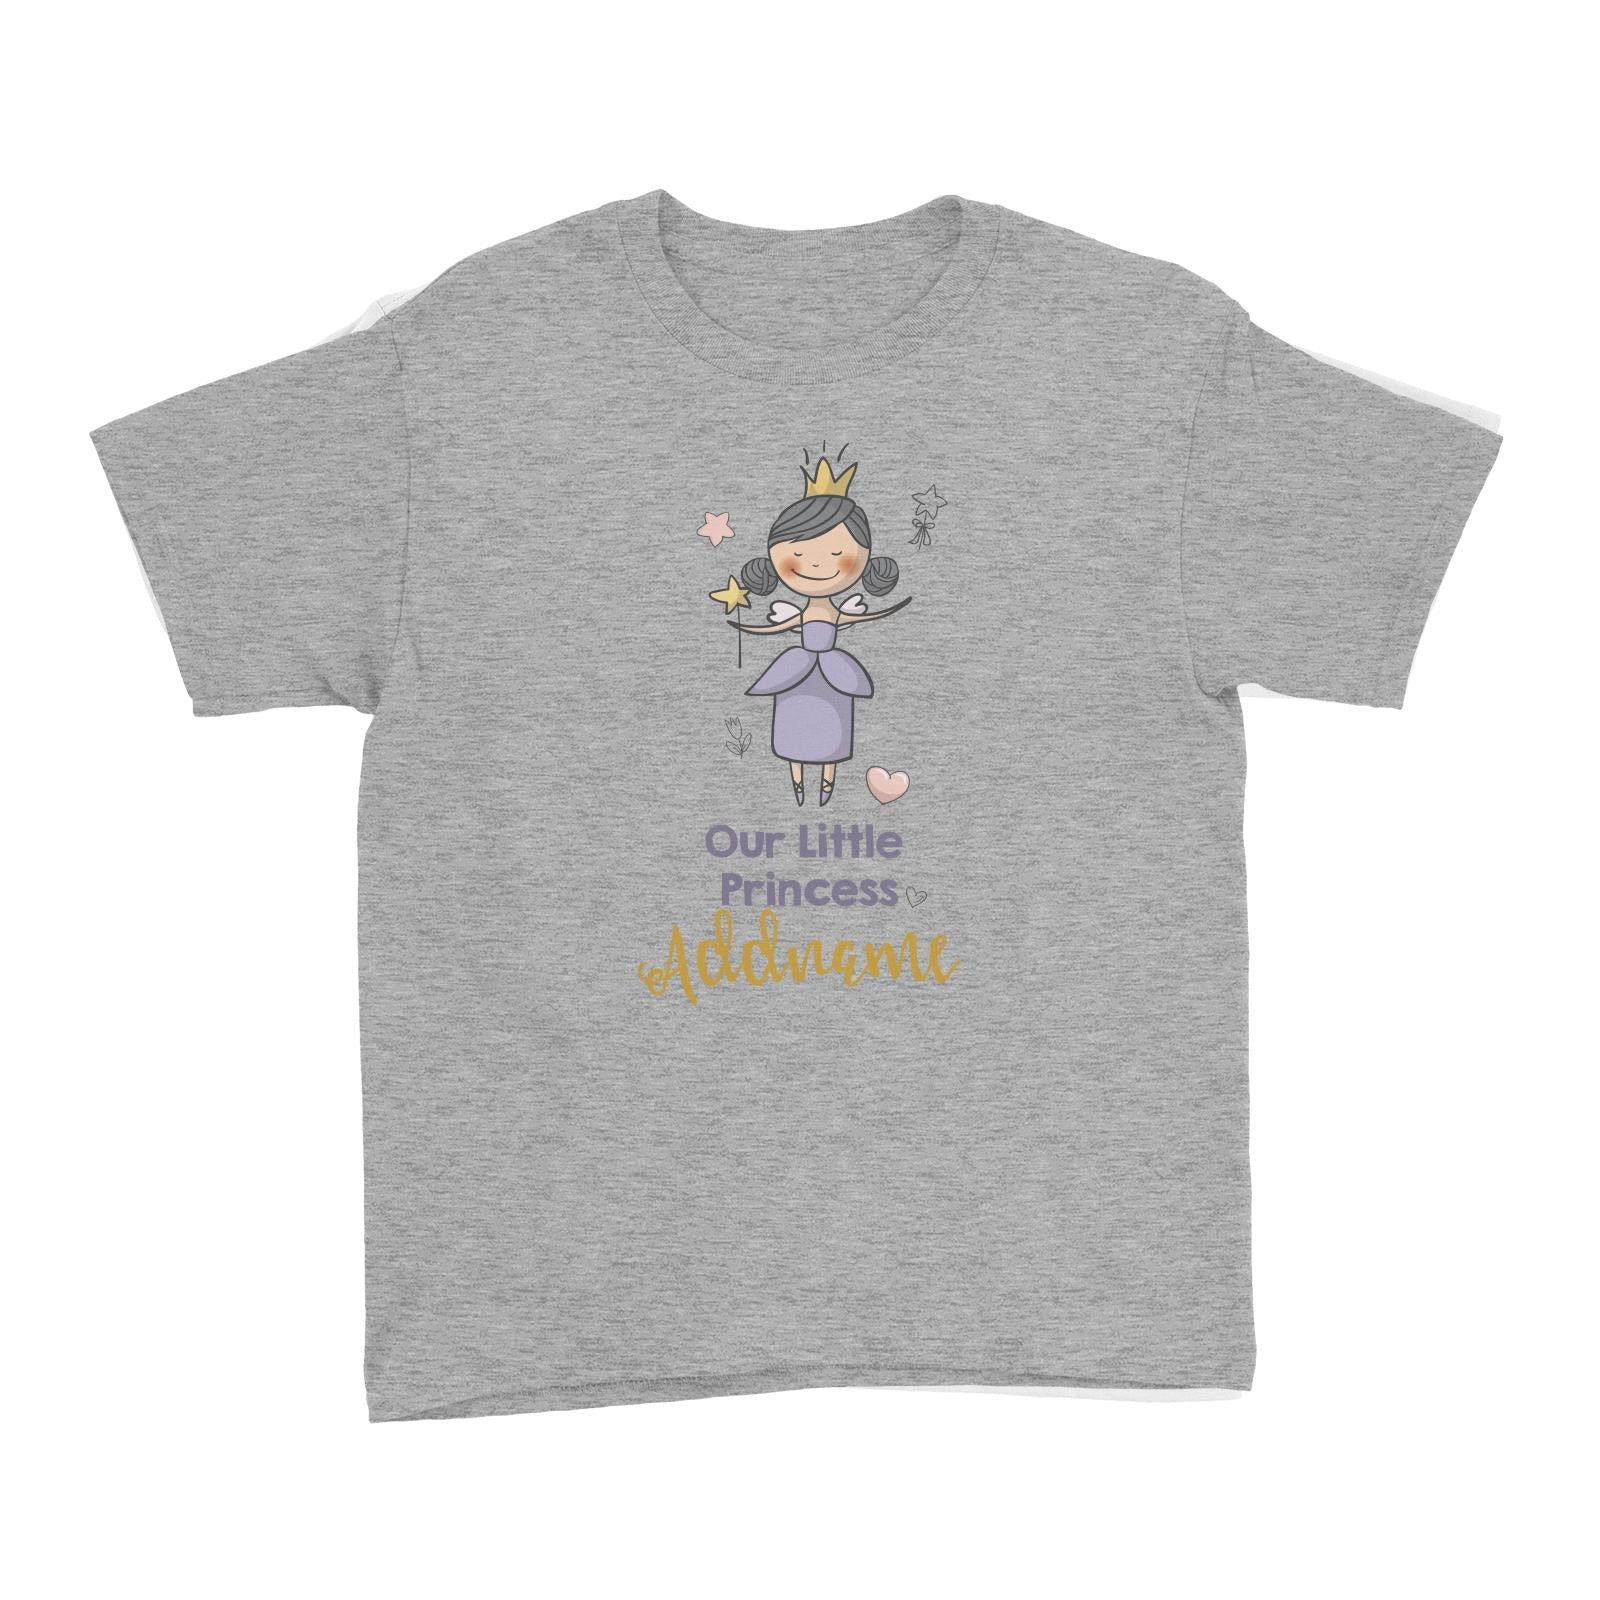 Our Little Princess in Purple Dress with Addname Kid's T-Shirt